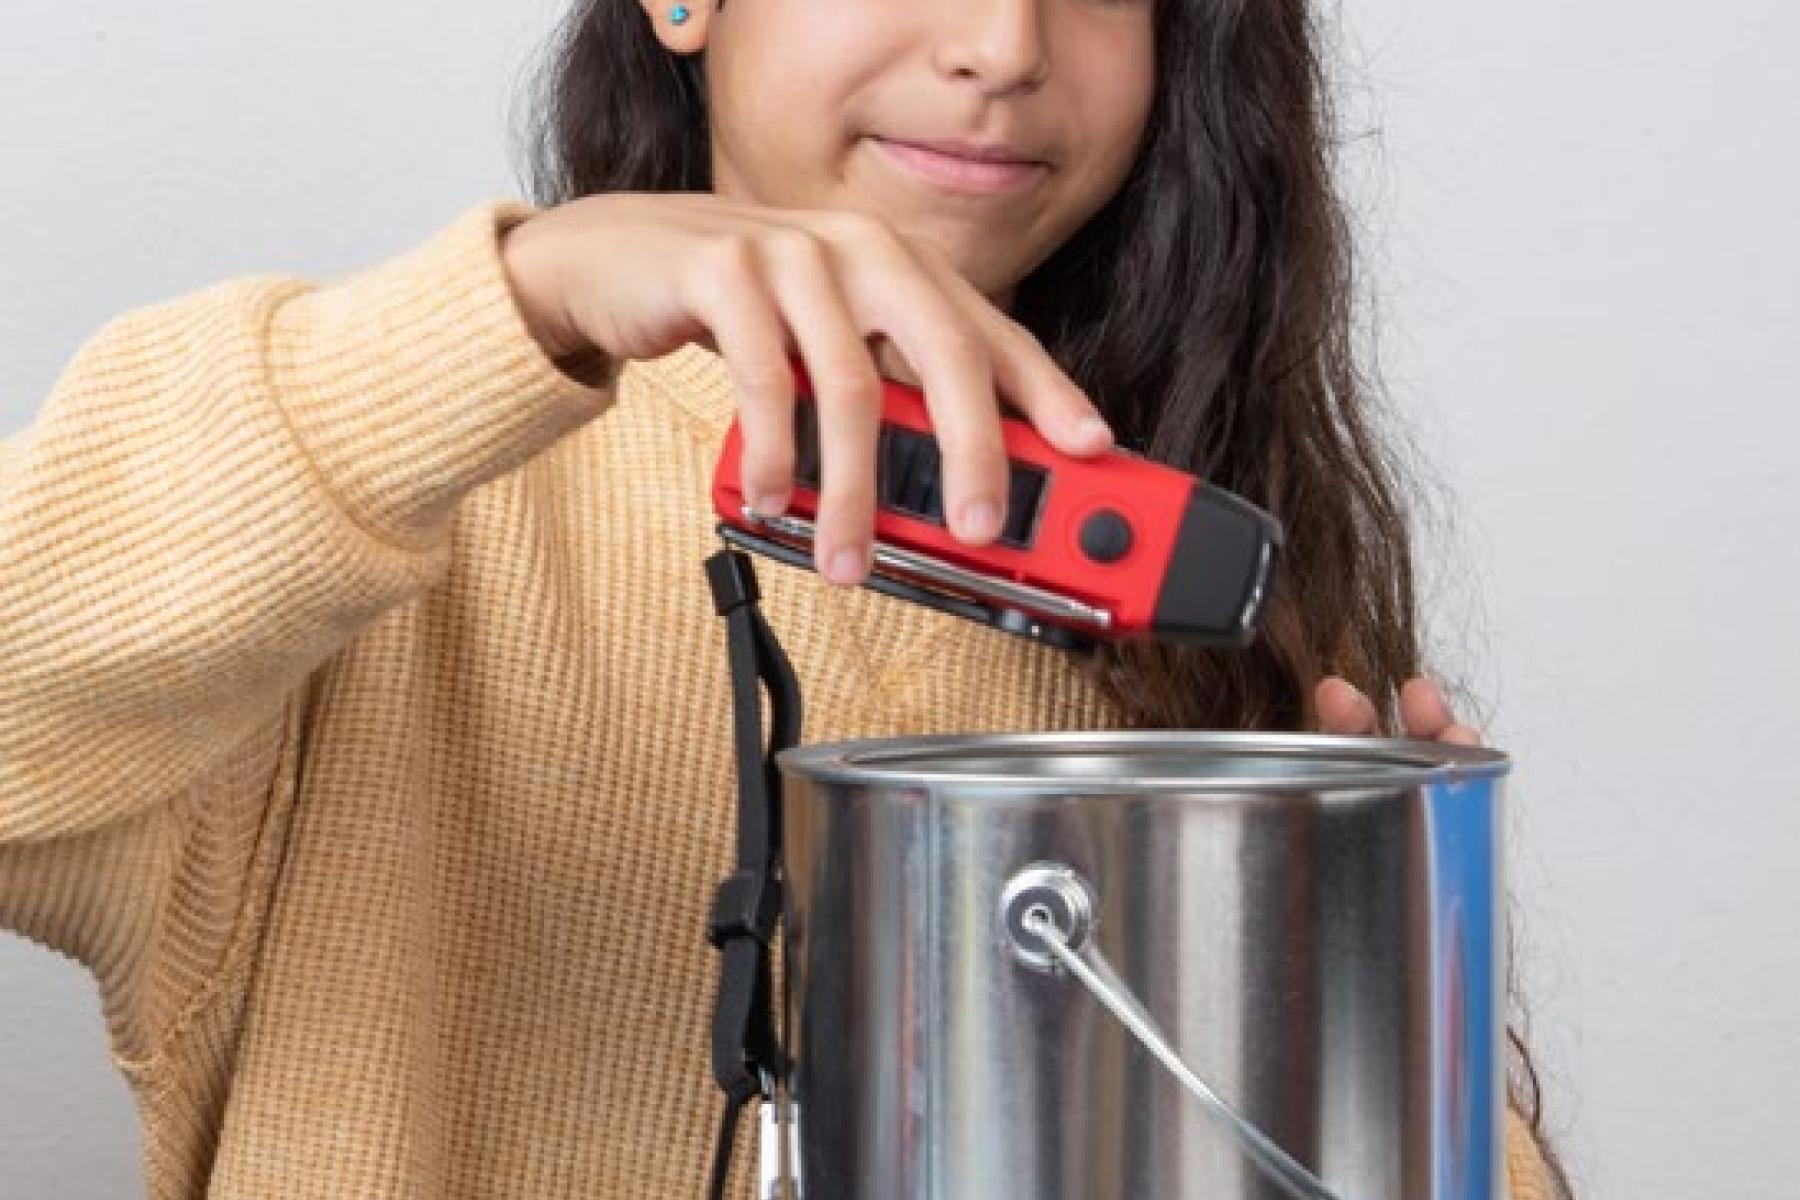 A child places a handheld radio into a metal paint can.